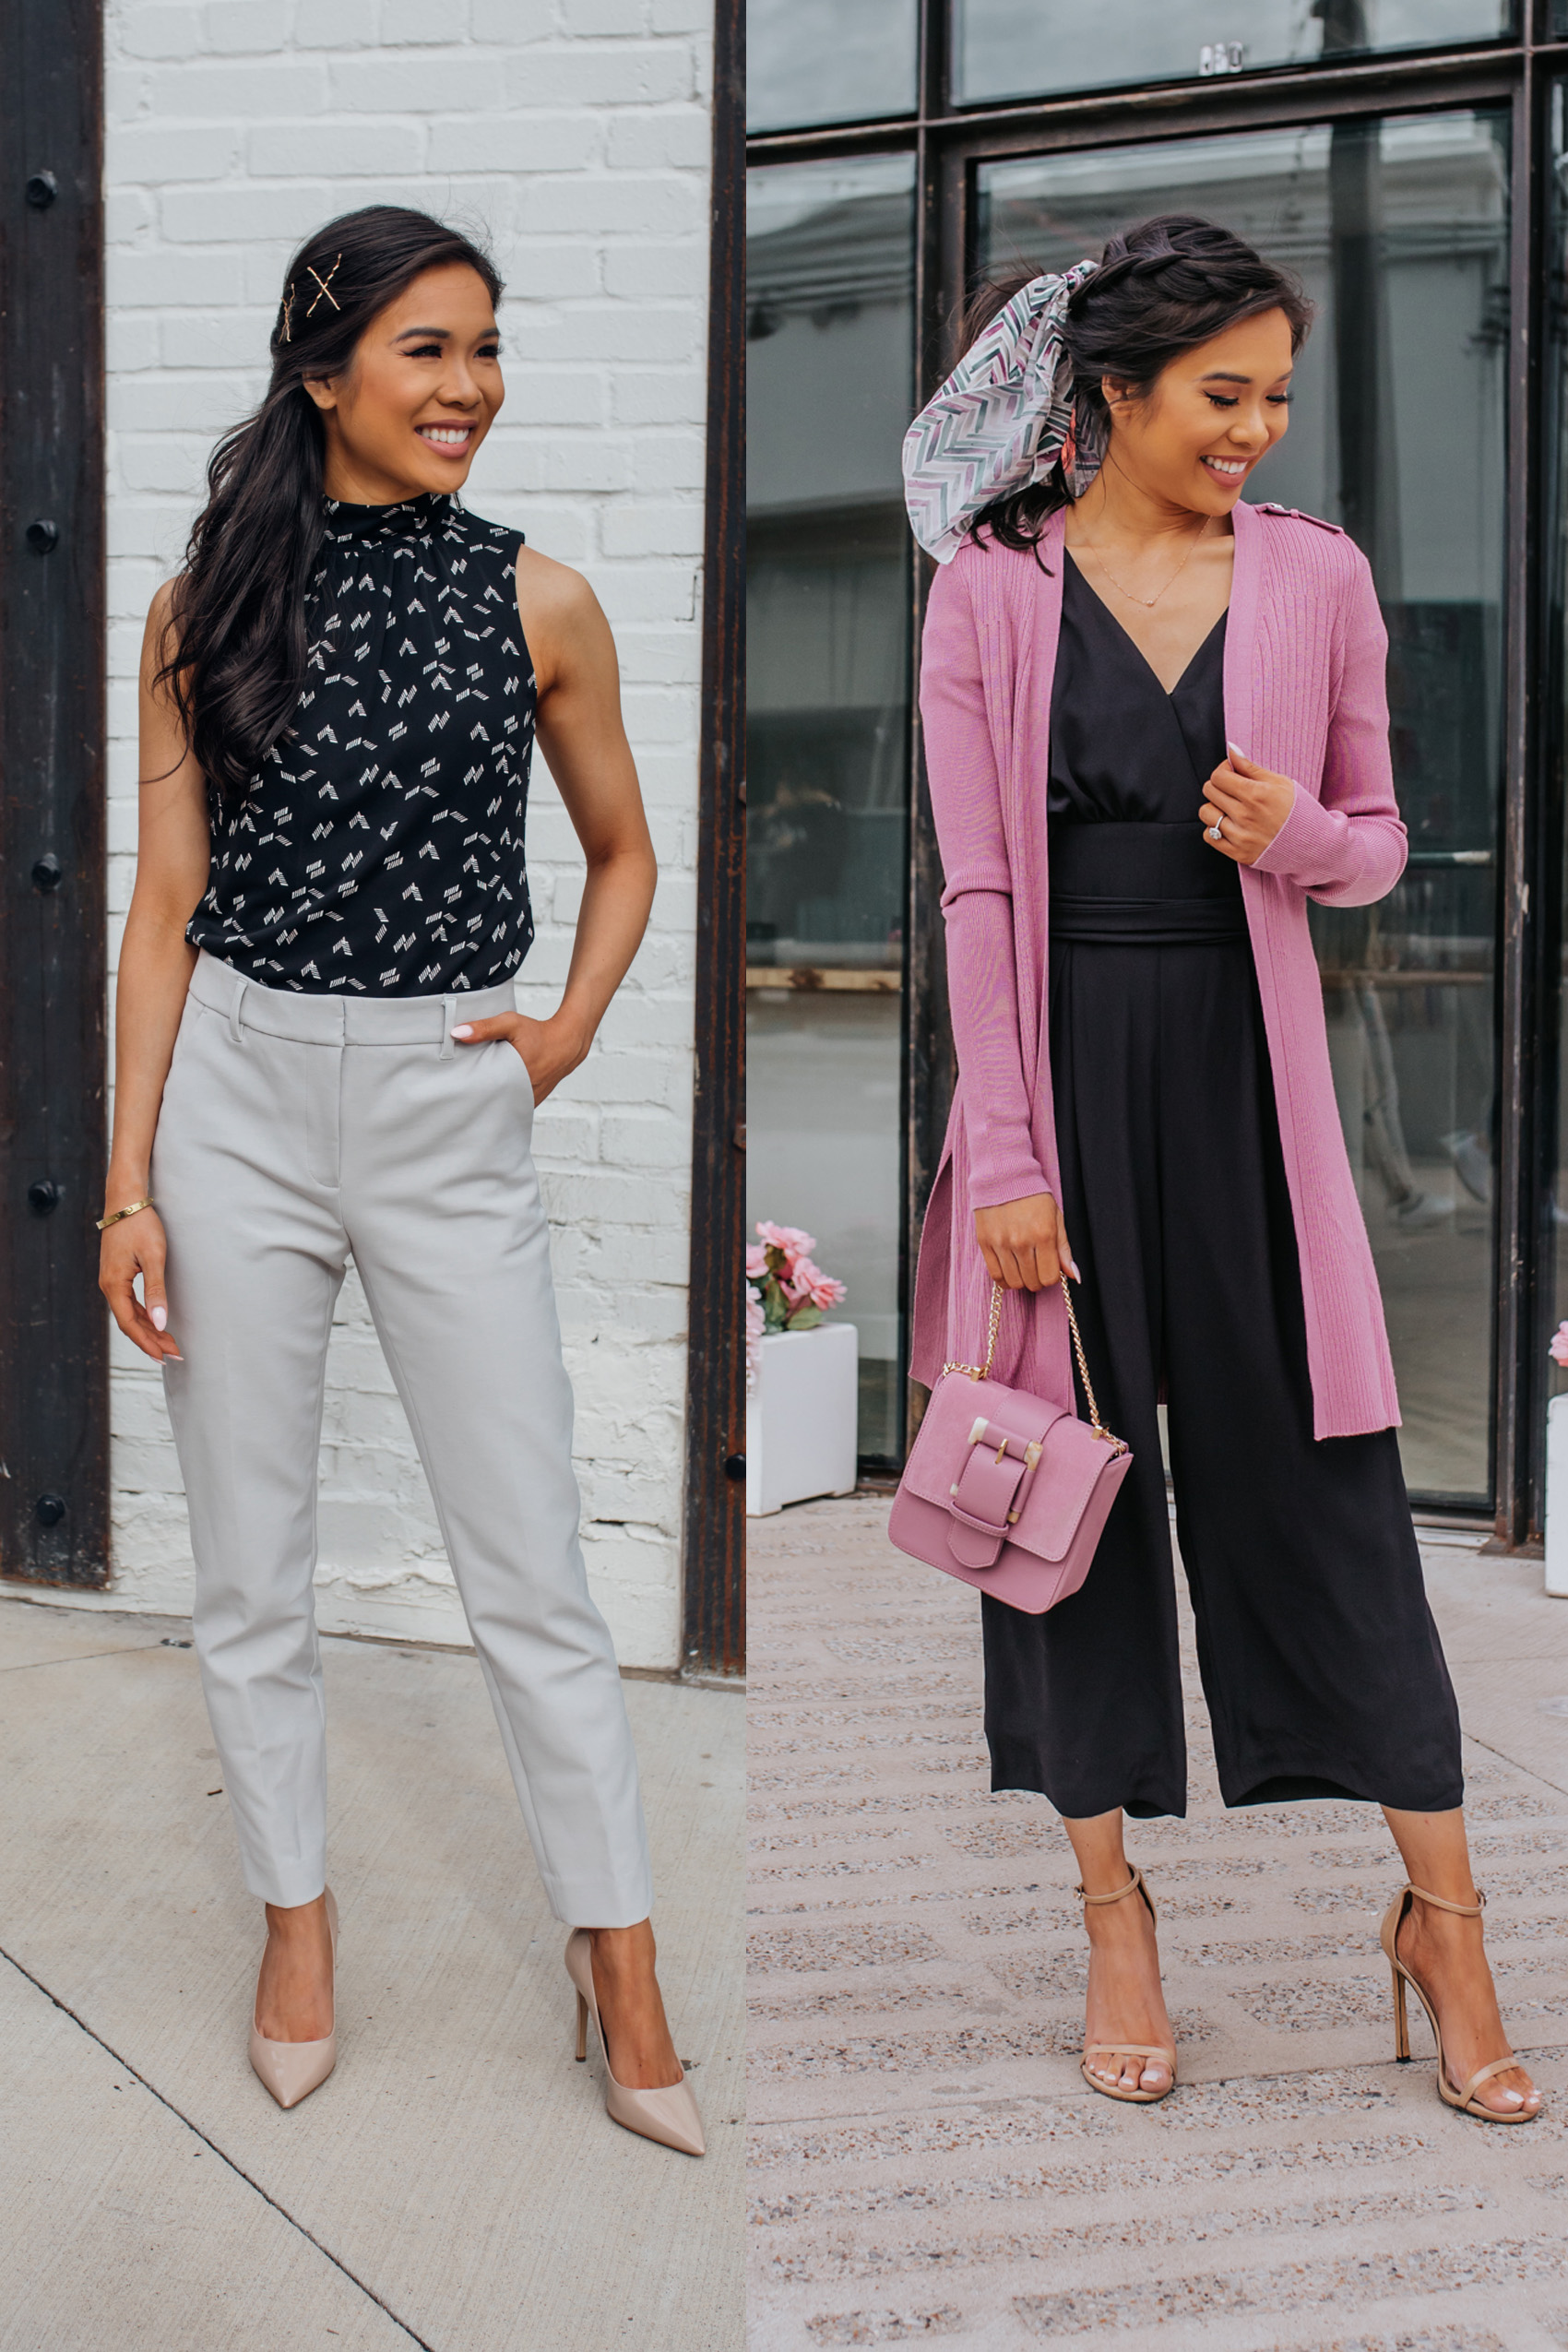 Blogger Hoang-Kim wears spring workwear including light gray ankle pants and a mockneck top for one outfit and a black jumpsuit with a pink cover-up for the other from White House Black Market